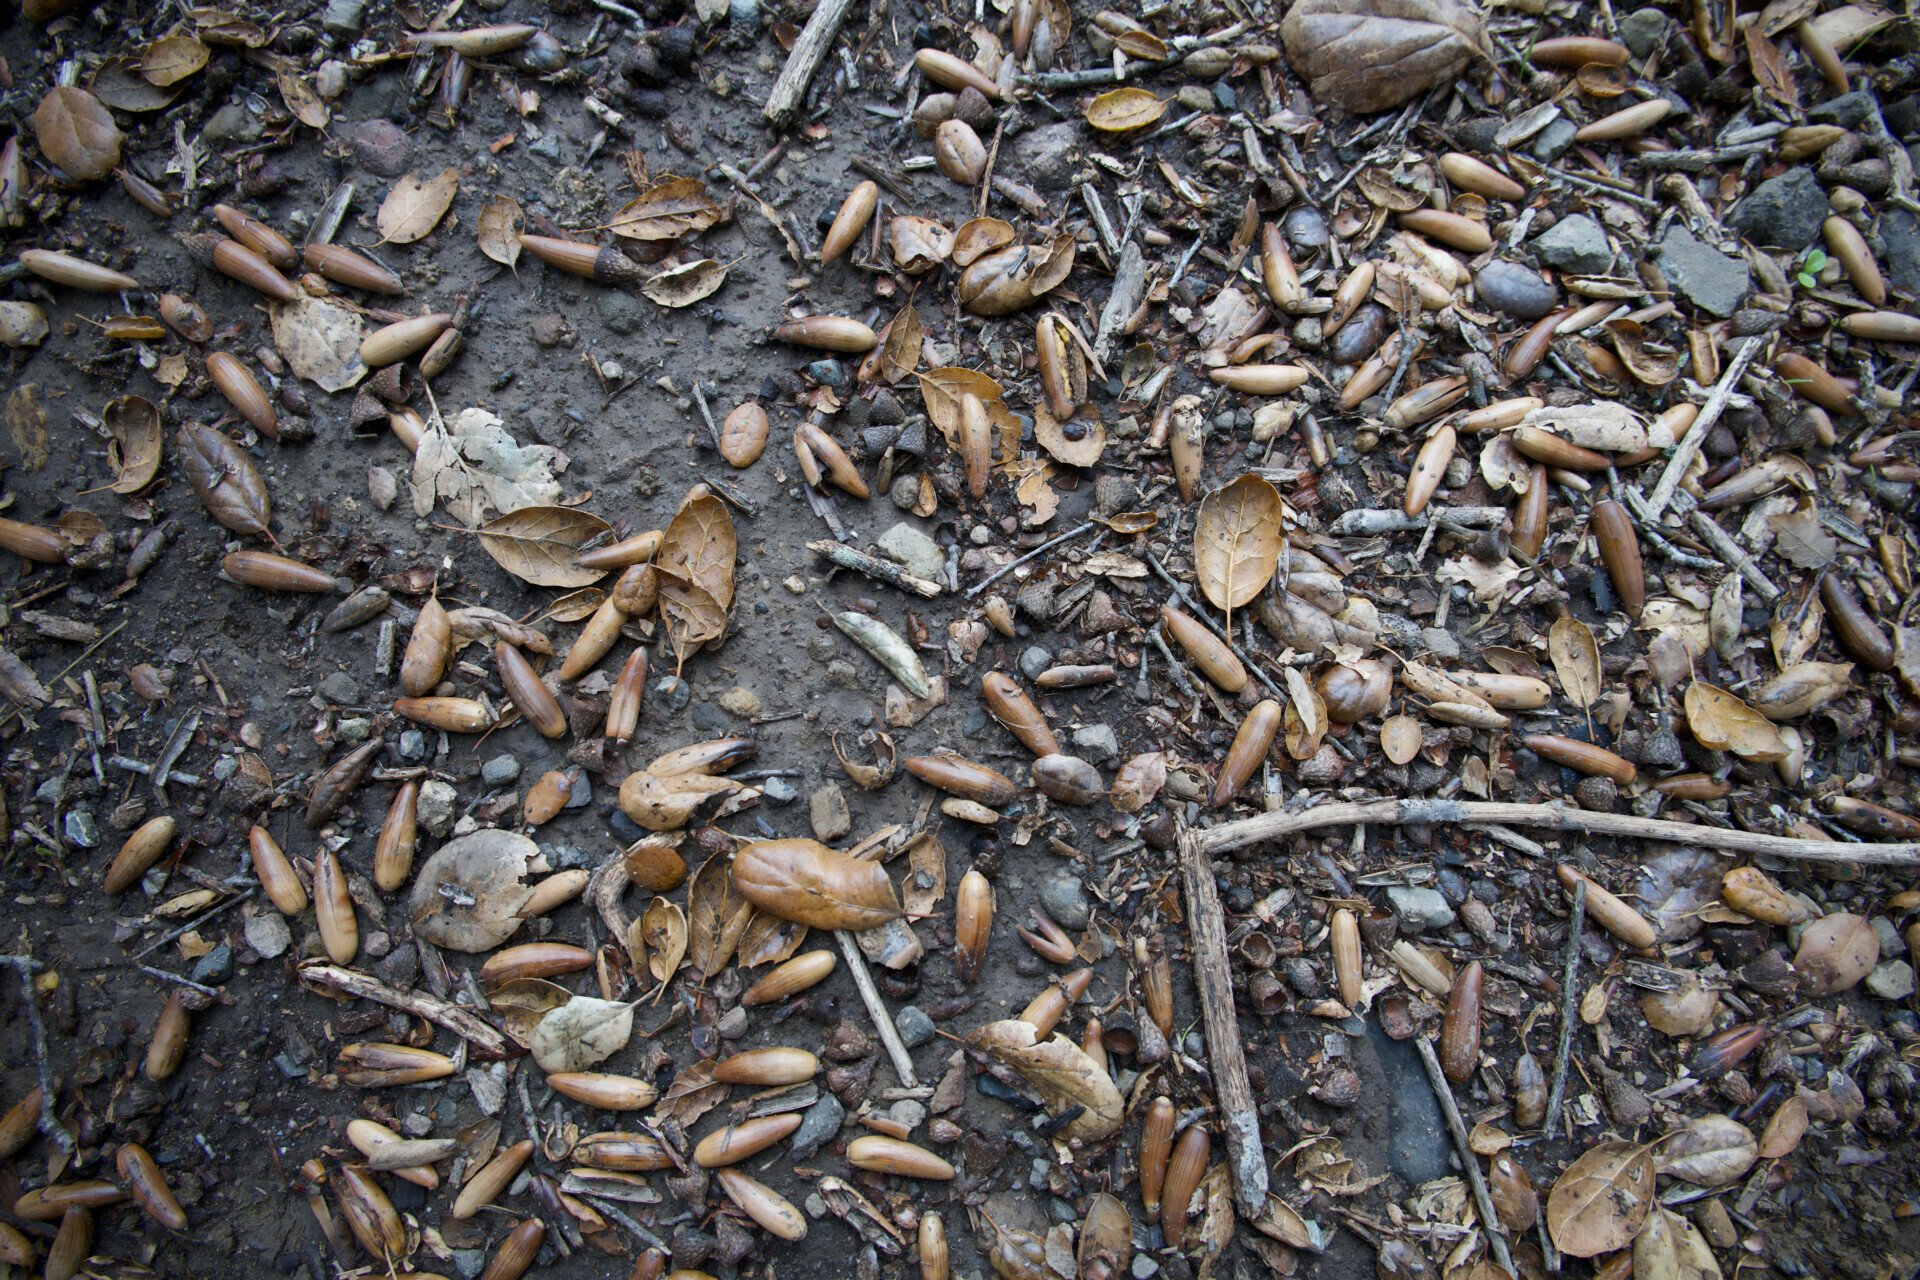 Various brown acorns and decaying leaves are scattered on the ground in Malibu Creek State Park.